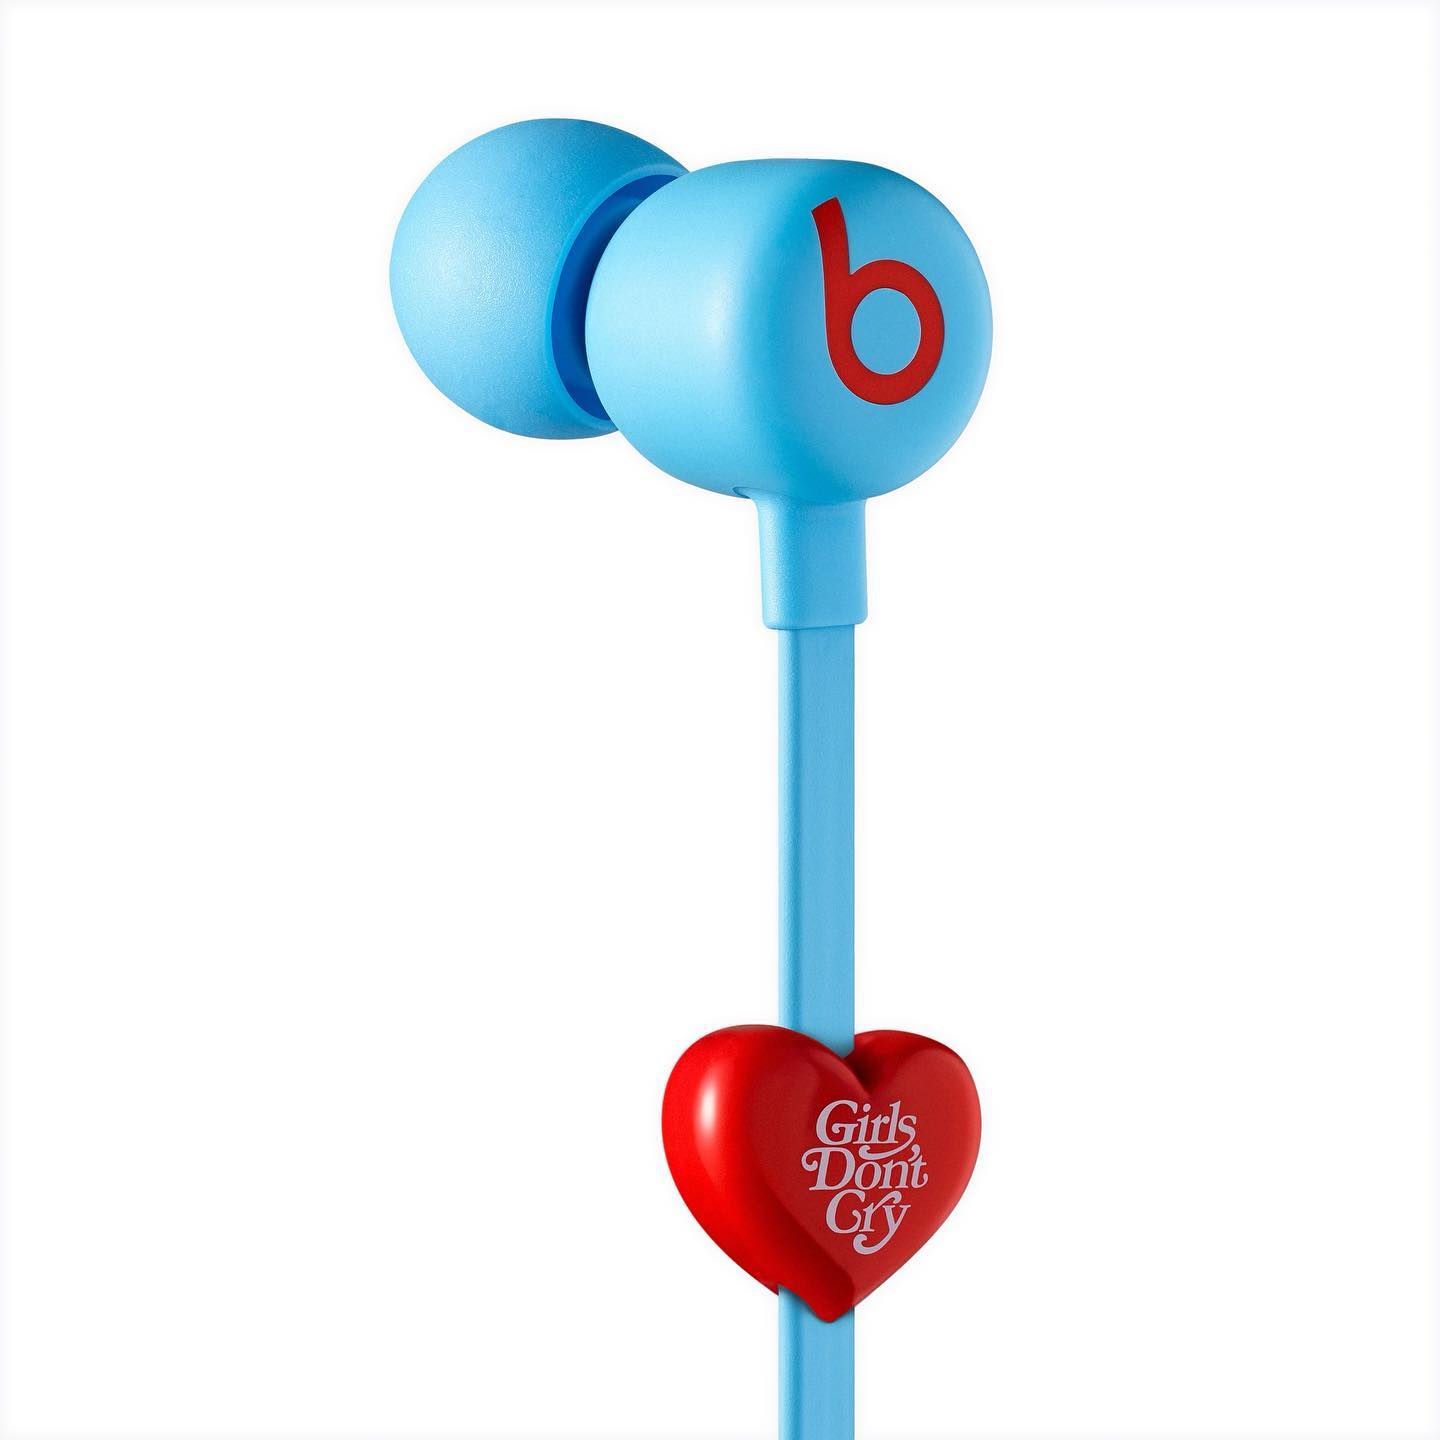 Beats by Dr. Dre × Girls Don't Cry のコラボワイヤレスイヤホンが 